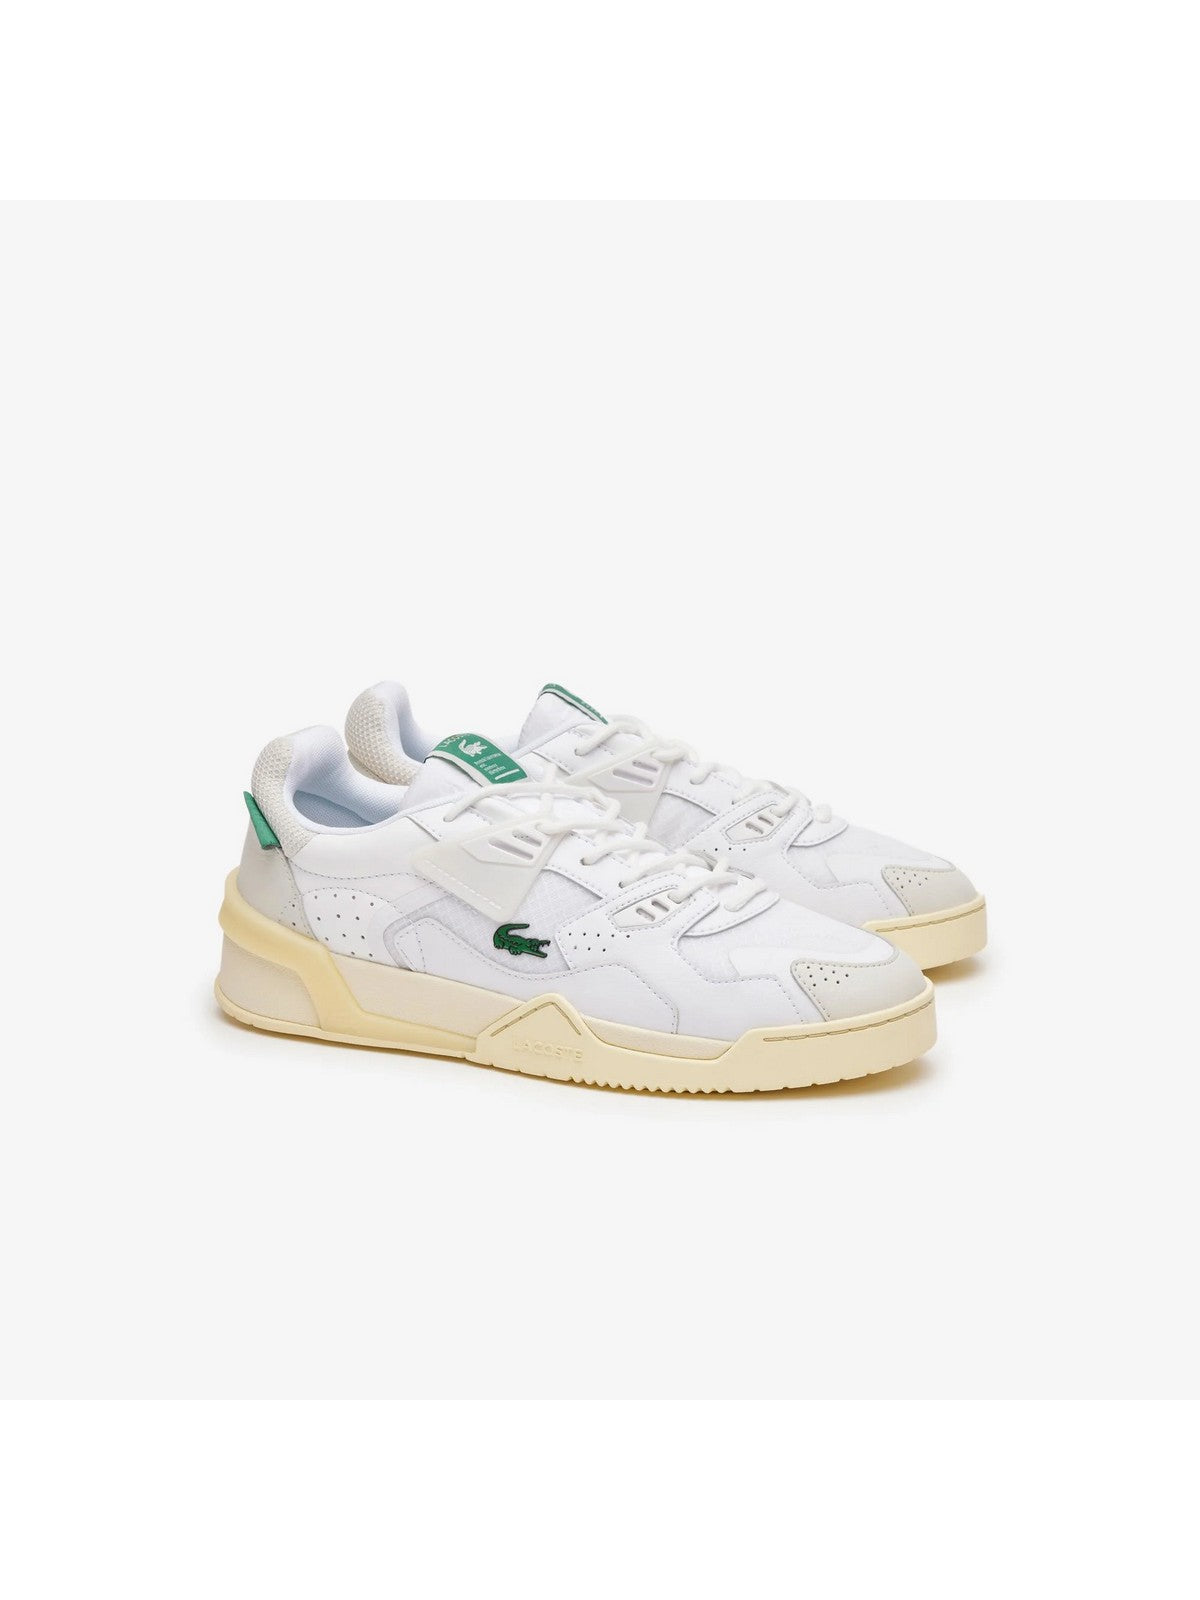 LACOSTE Sneaker Homme 746SMA0055 2H8 Blanc